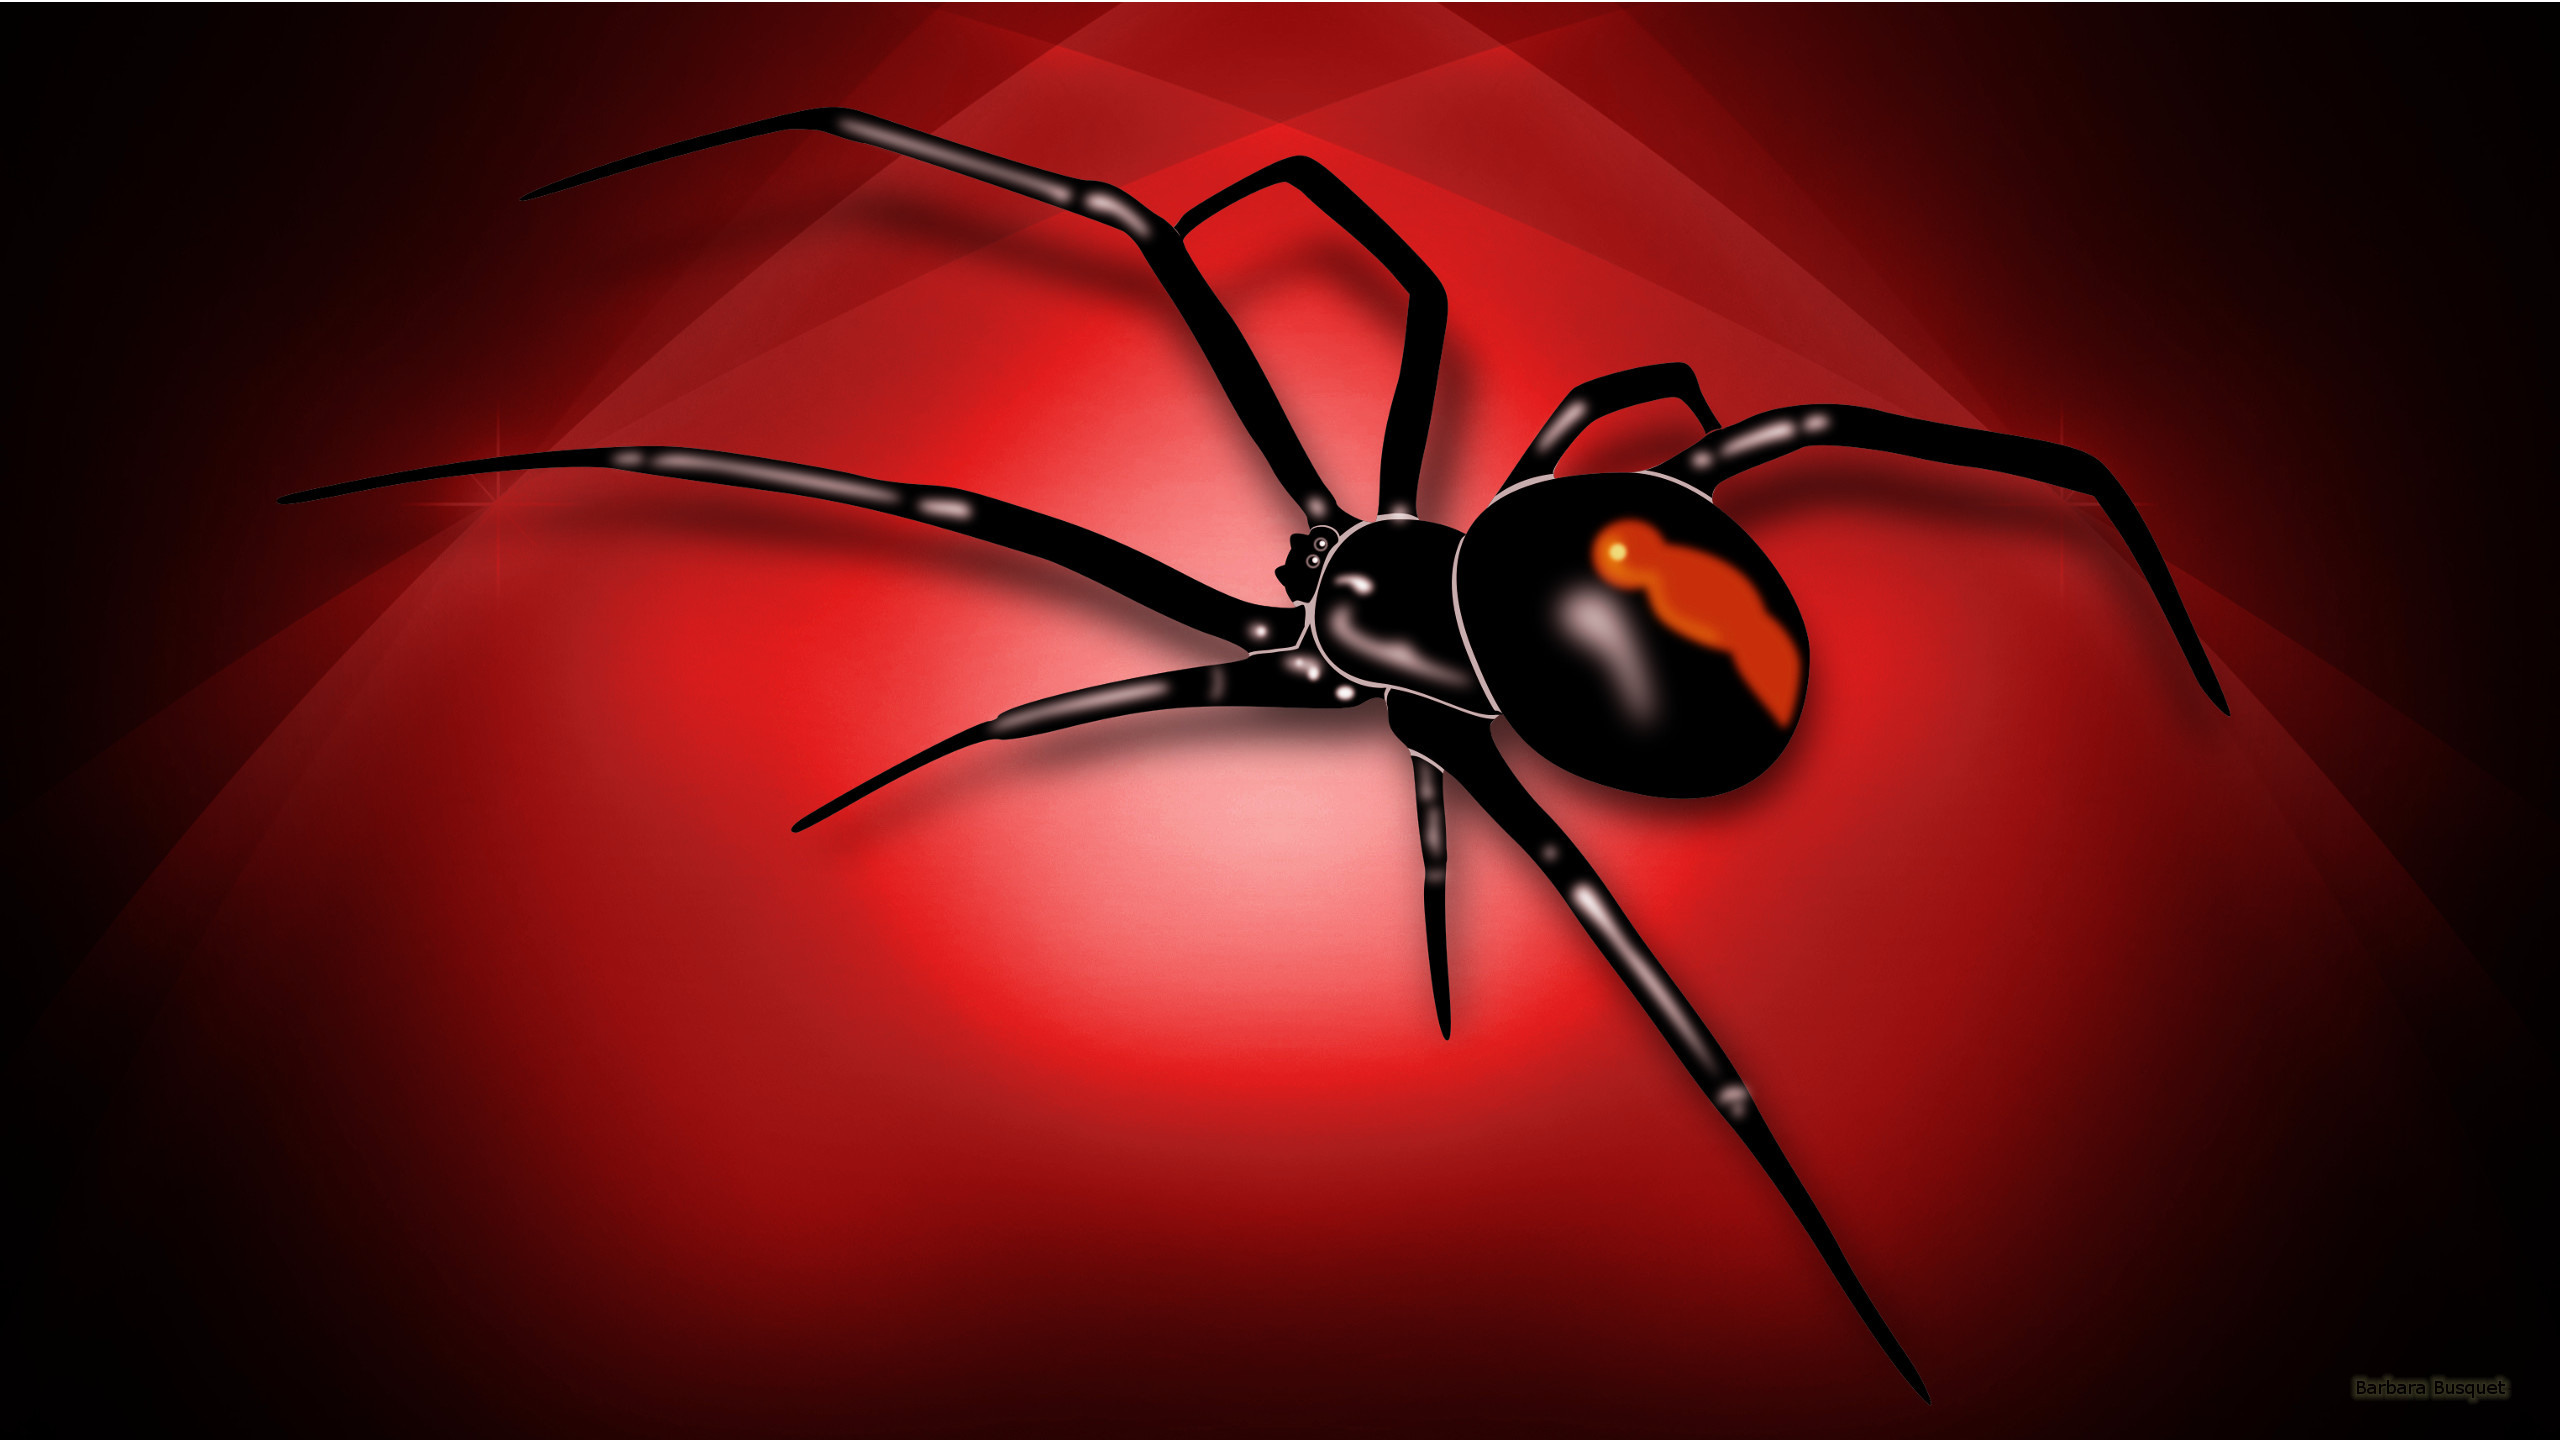 2560x1440 hd wallpaper with red white spider